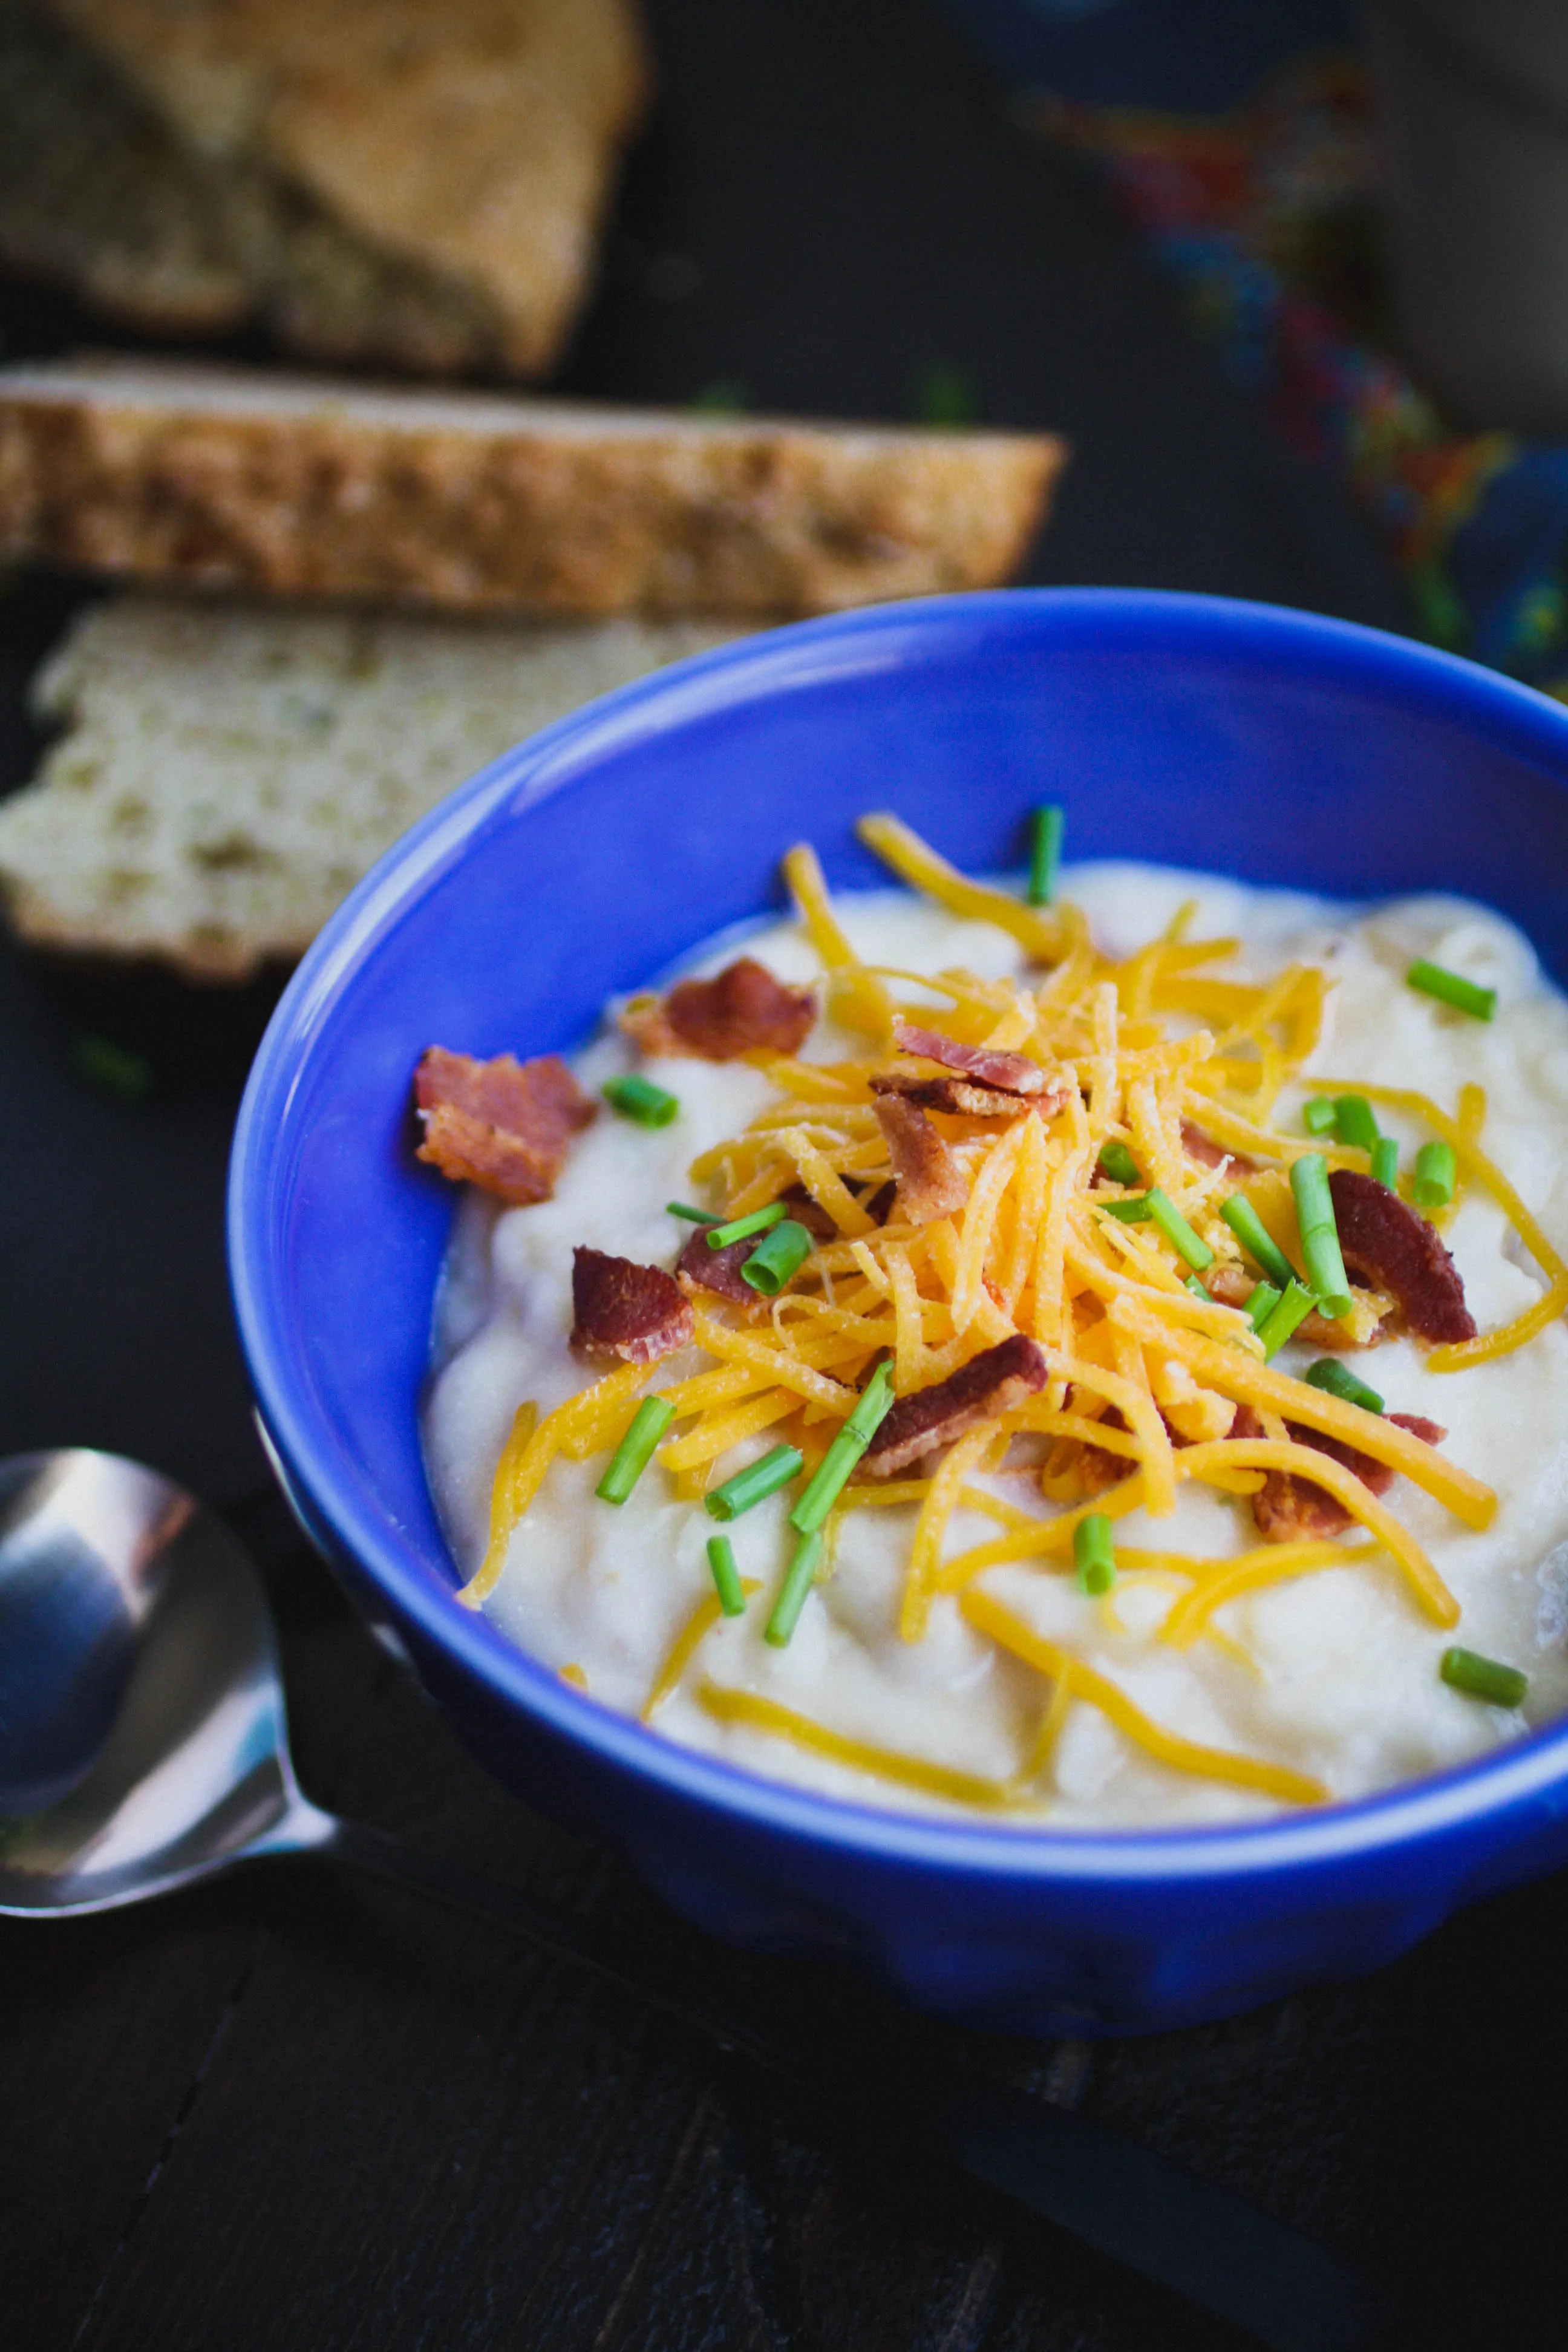 Loaded Baked Potato Soup is ideal on a cold night. Loaded Baked Potato Soup is a delight any night of the week.